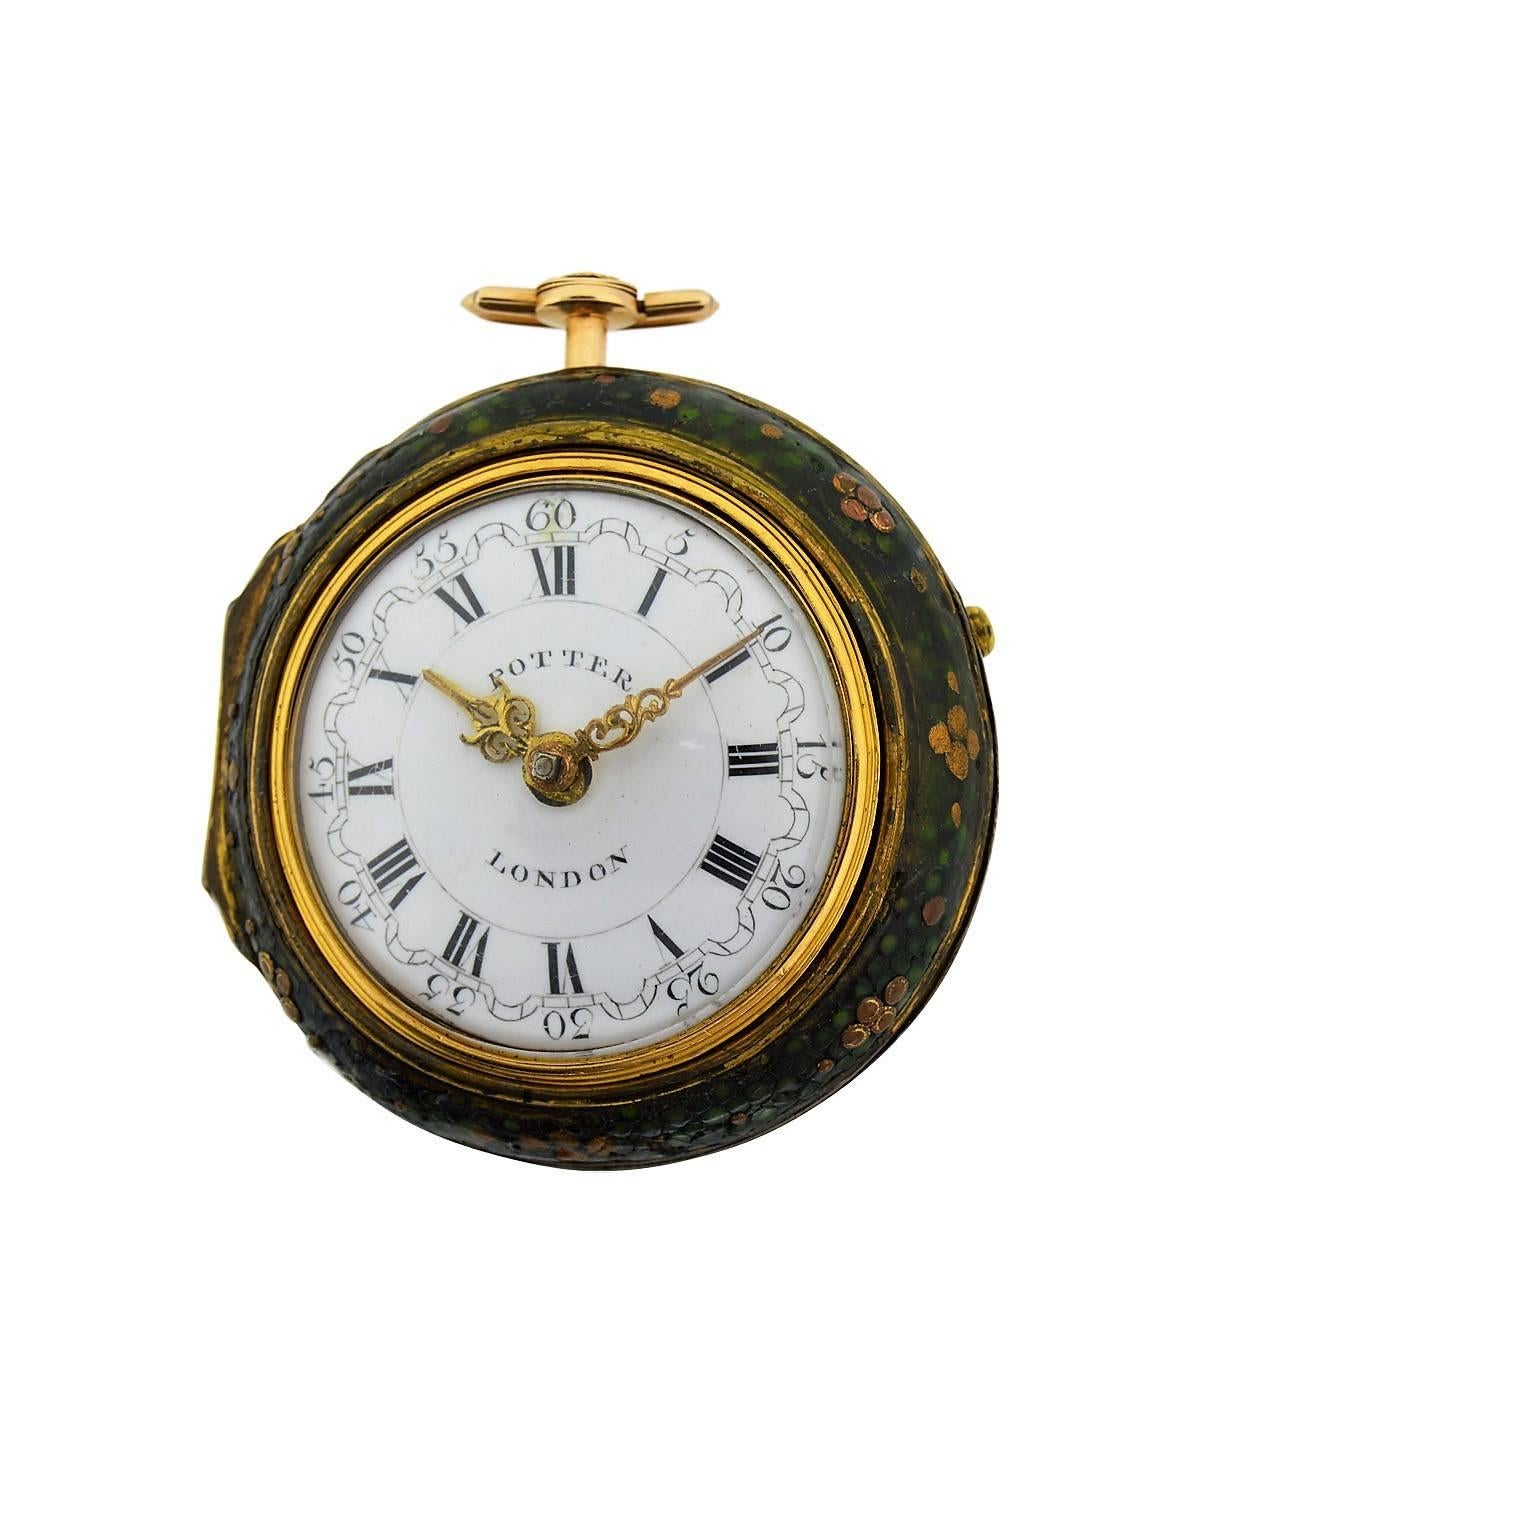 FACTORY / HOUSE: Harry Potter
STYLE / REFERENCE: Triple Cased Repousse Pocket Watch
METAL / MATERIAL: 18Kt. Yellow Gold & Chagreen
DIMENSIONS:  Diameter 2 1/8 in. (5.4 cm) 
CIRCA: 1791
MOVEMENT / CALIBER: Verge Fuzee
DIAL / HANDS: Original Enamel /